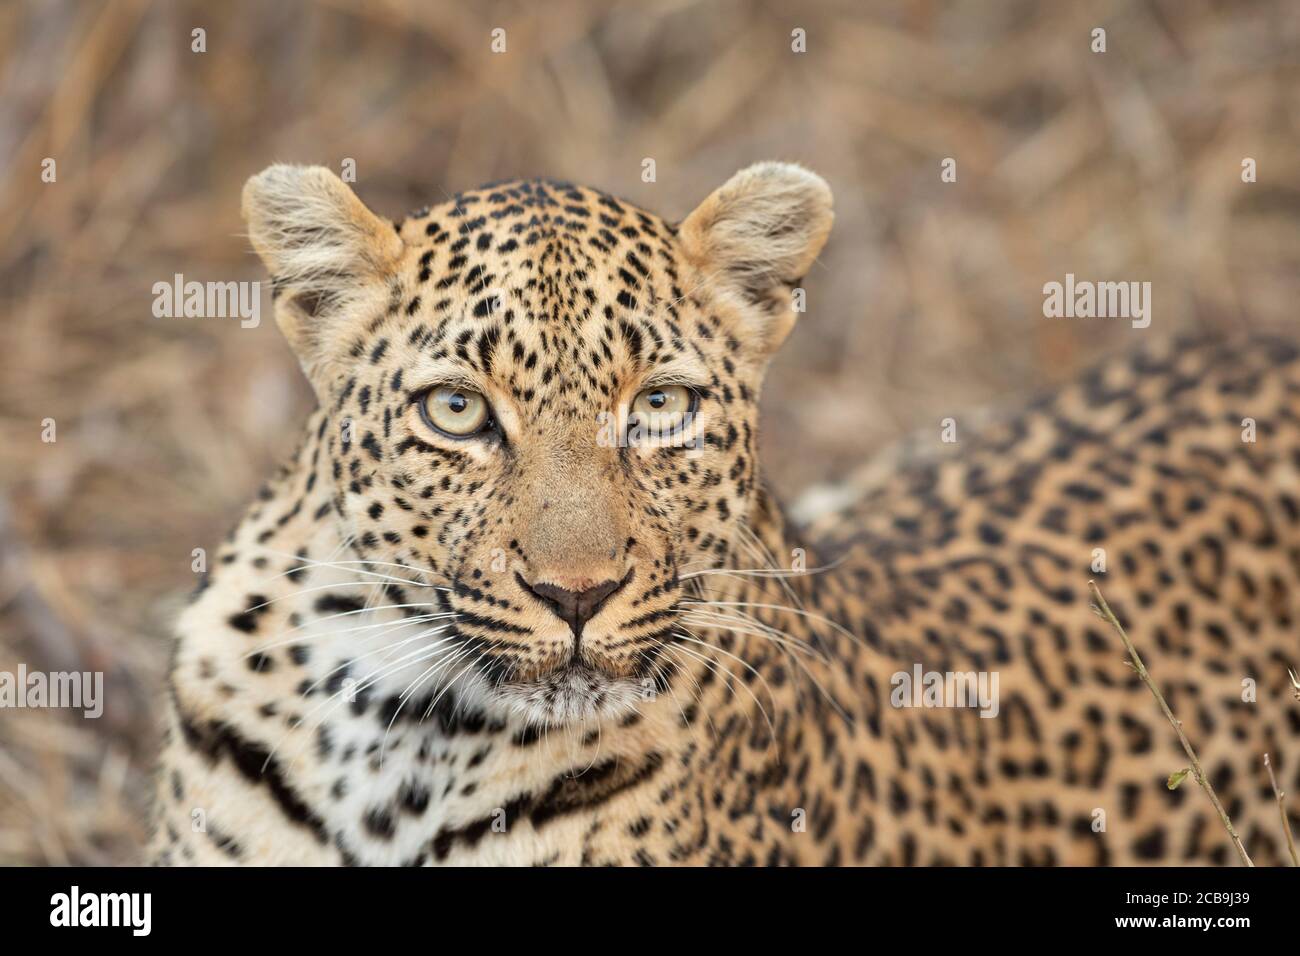 Close up on leopard face with big eyes in Kruger Park South Africa Stock Photo